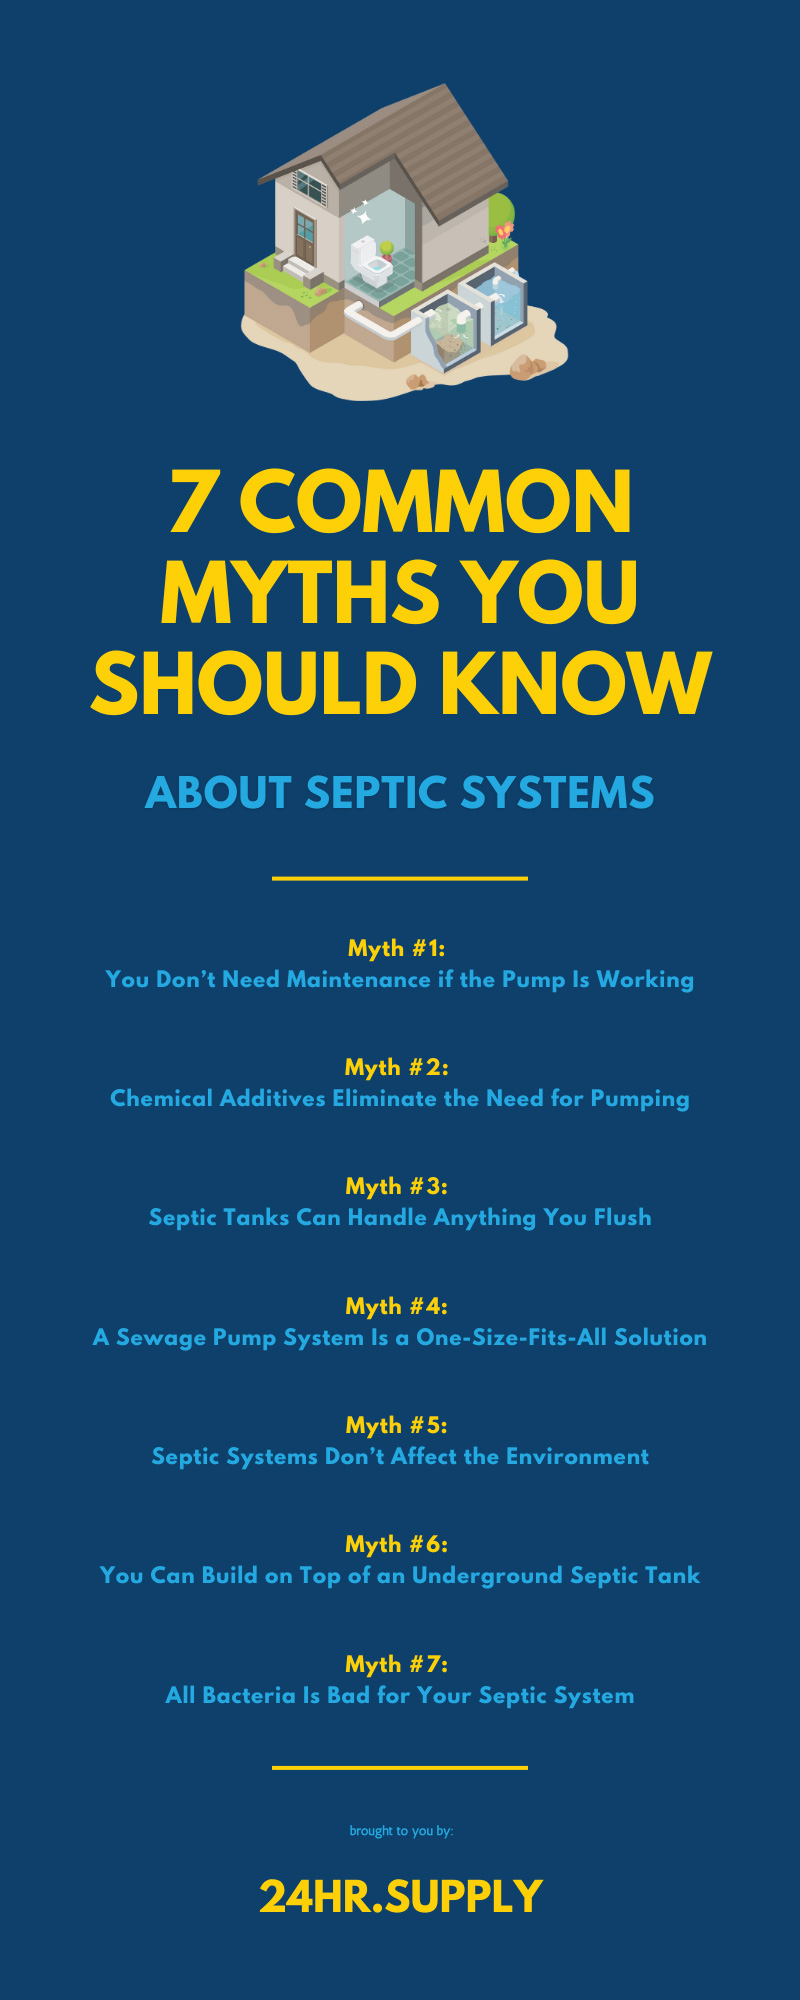 7 Common Myths You Should Know About Septic Systems